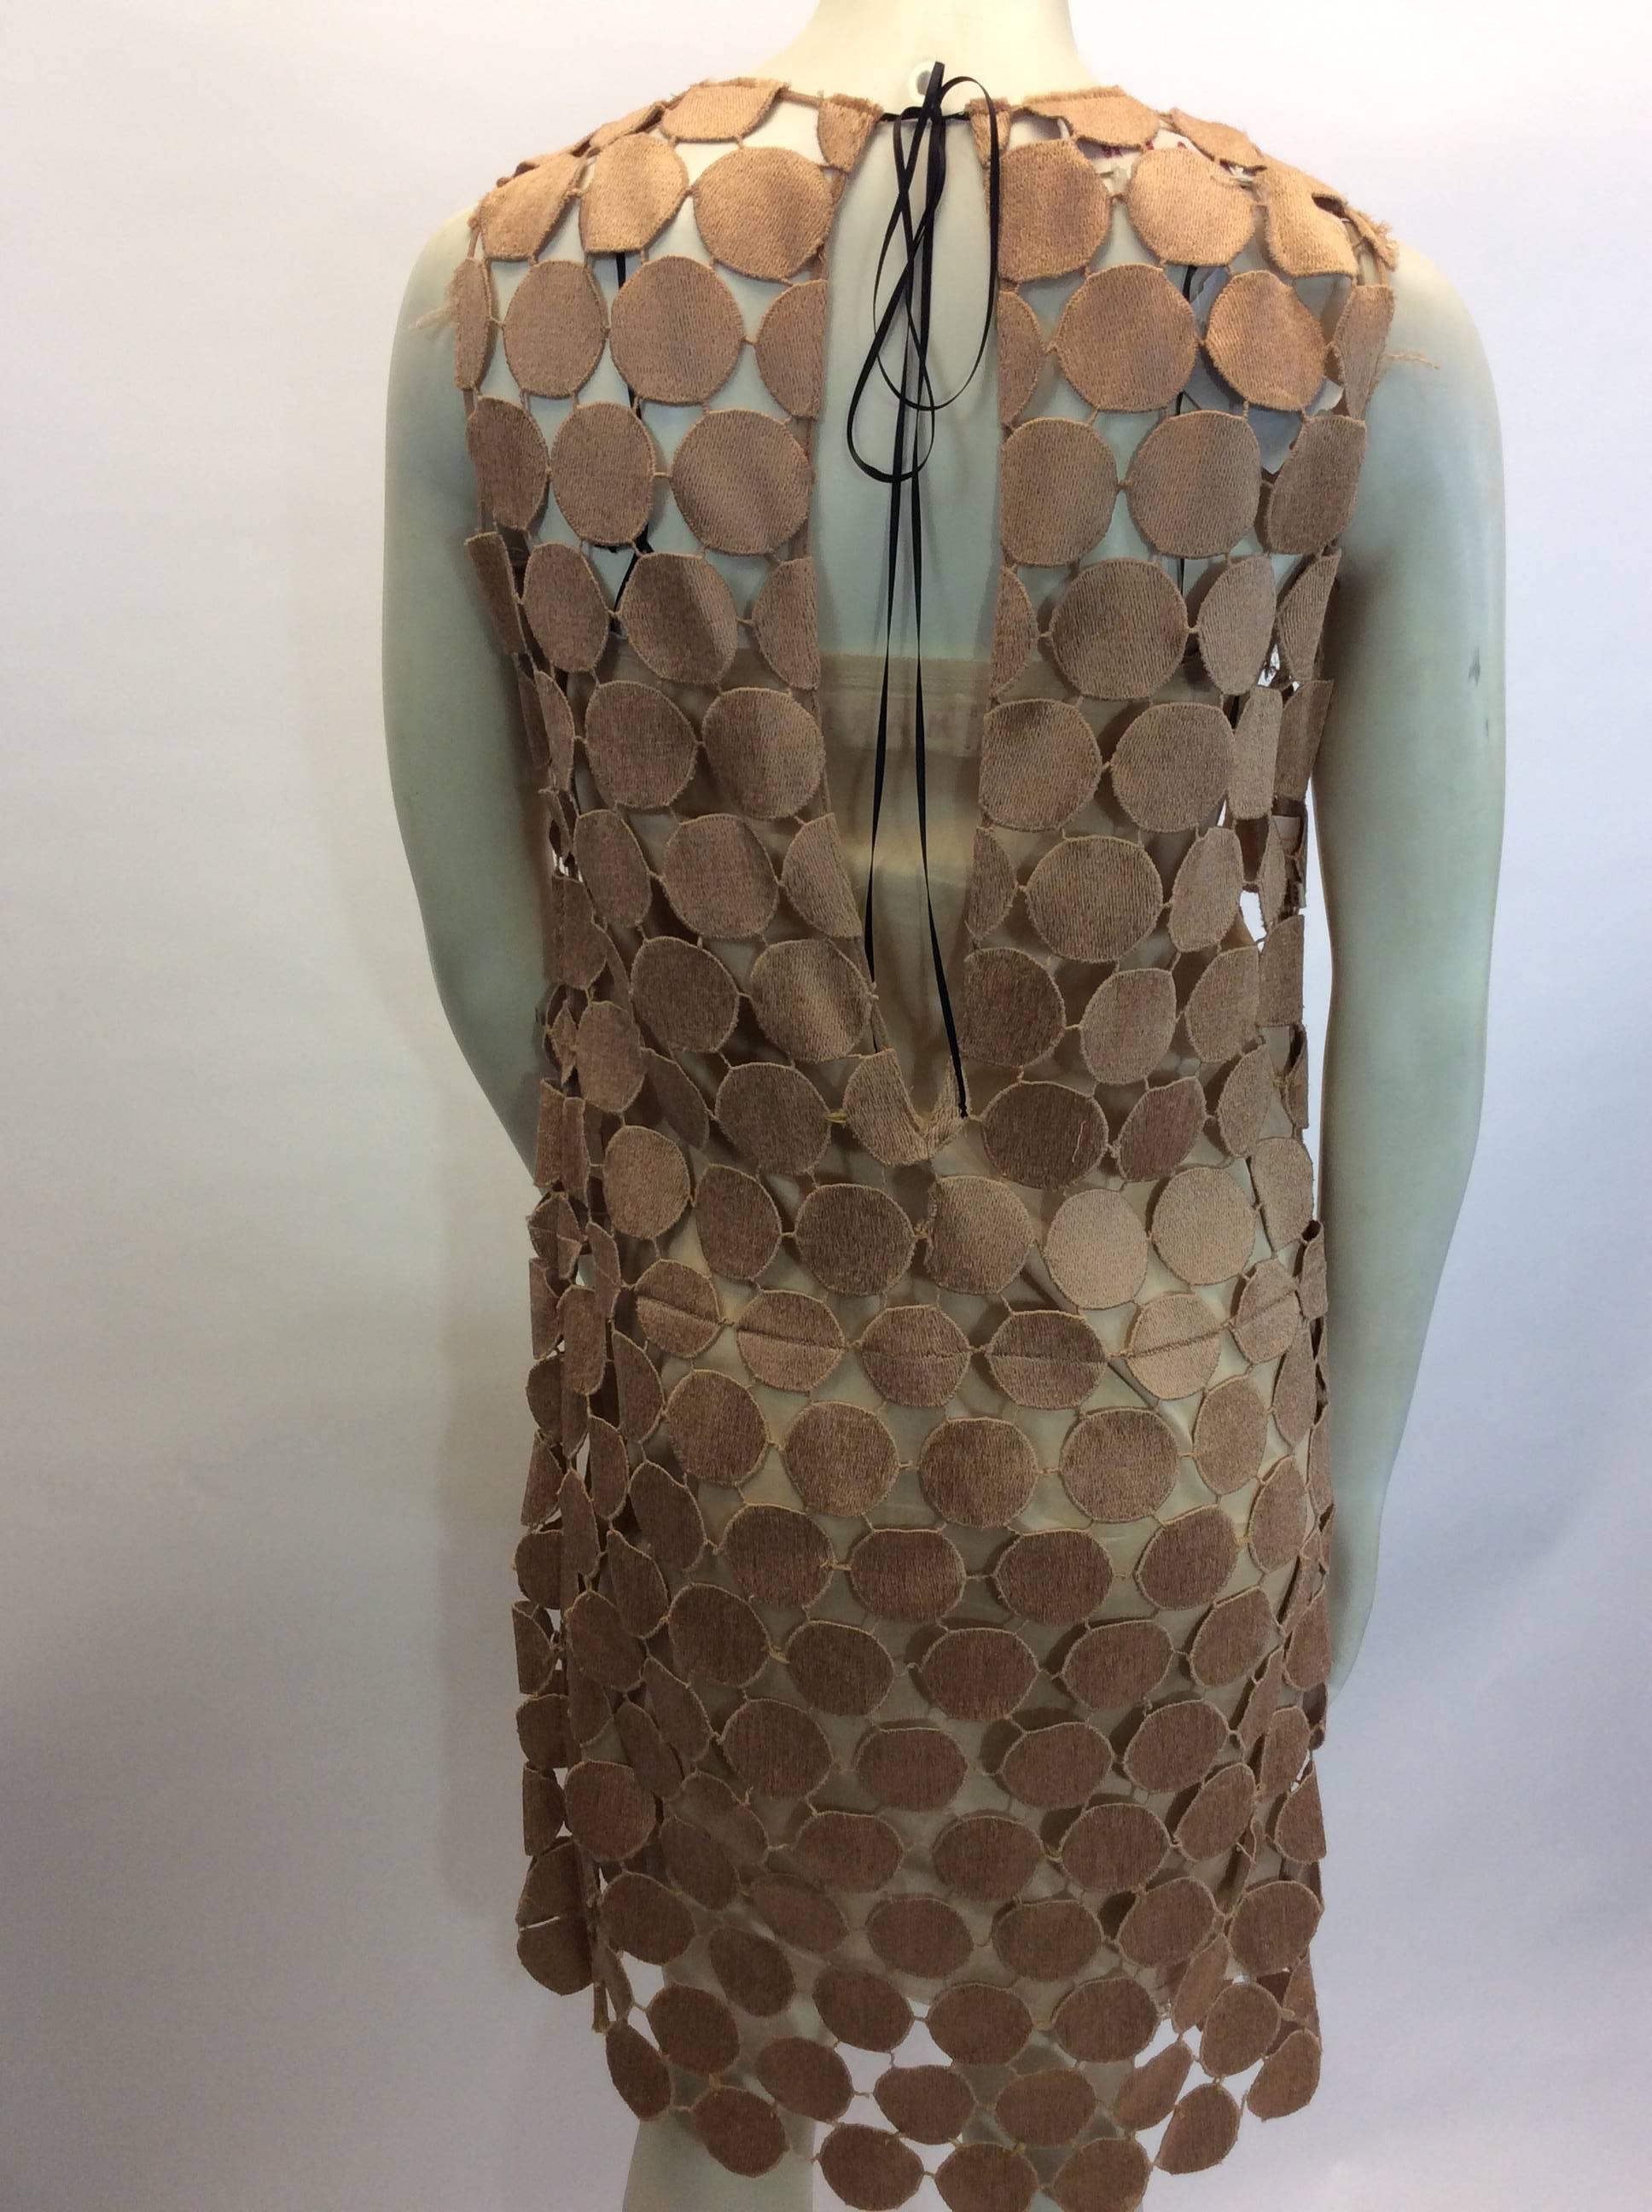 Marni Tan Crocheted Circle Pattern Sheath Dress In Excellent Condition For Sale In Narberth, PA